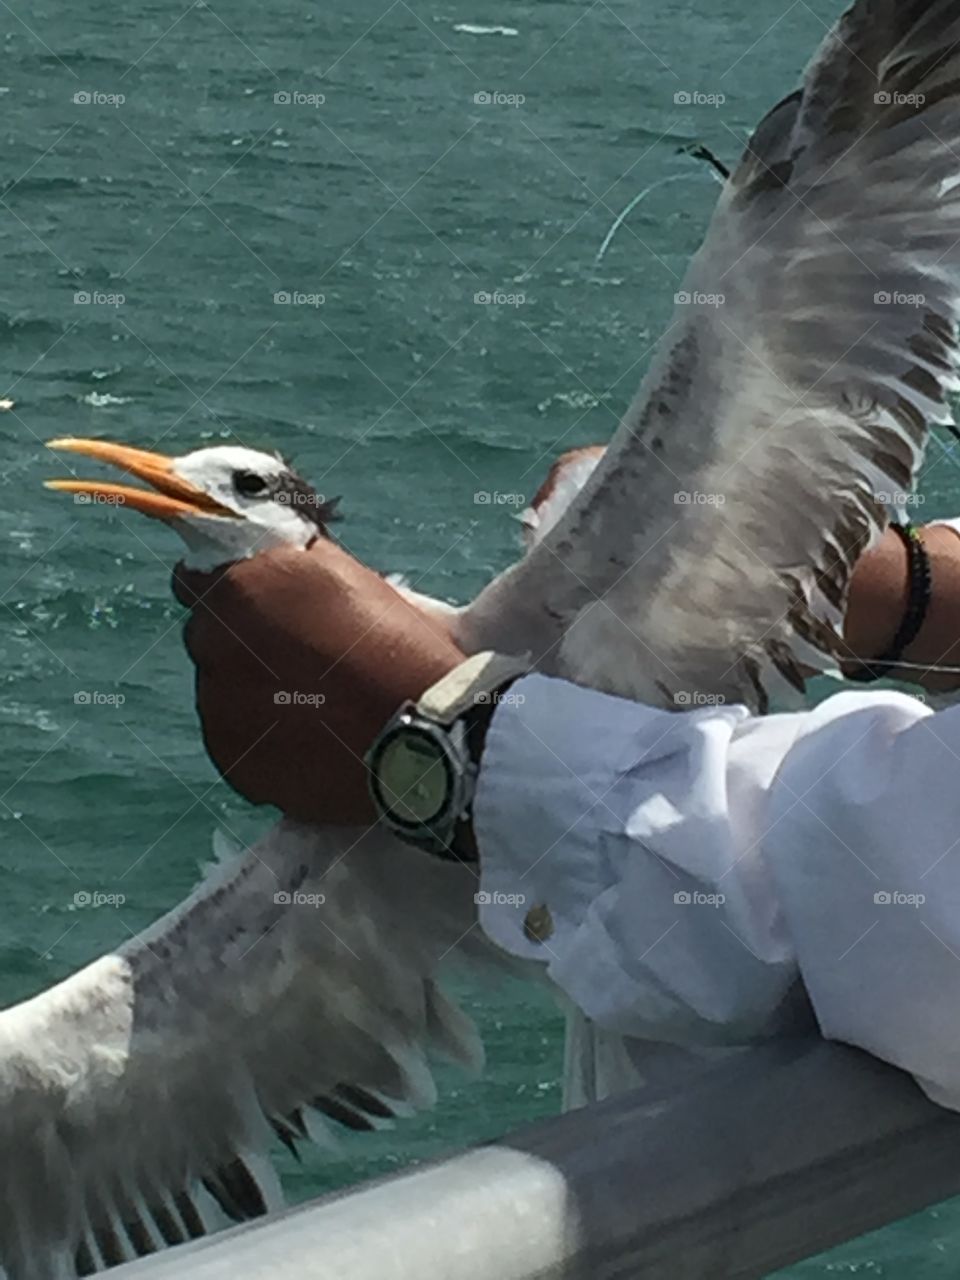 Tern rescued from fishing line 